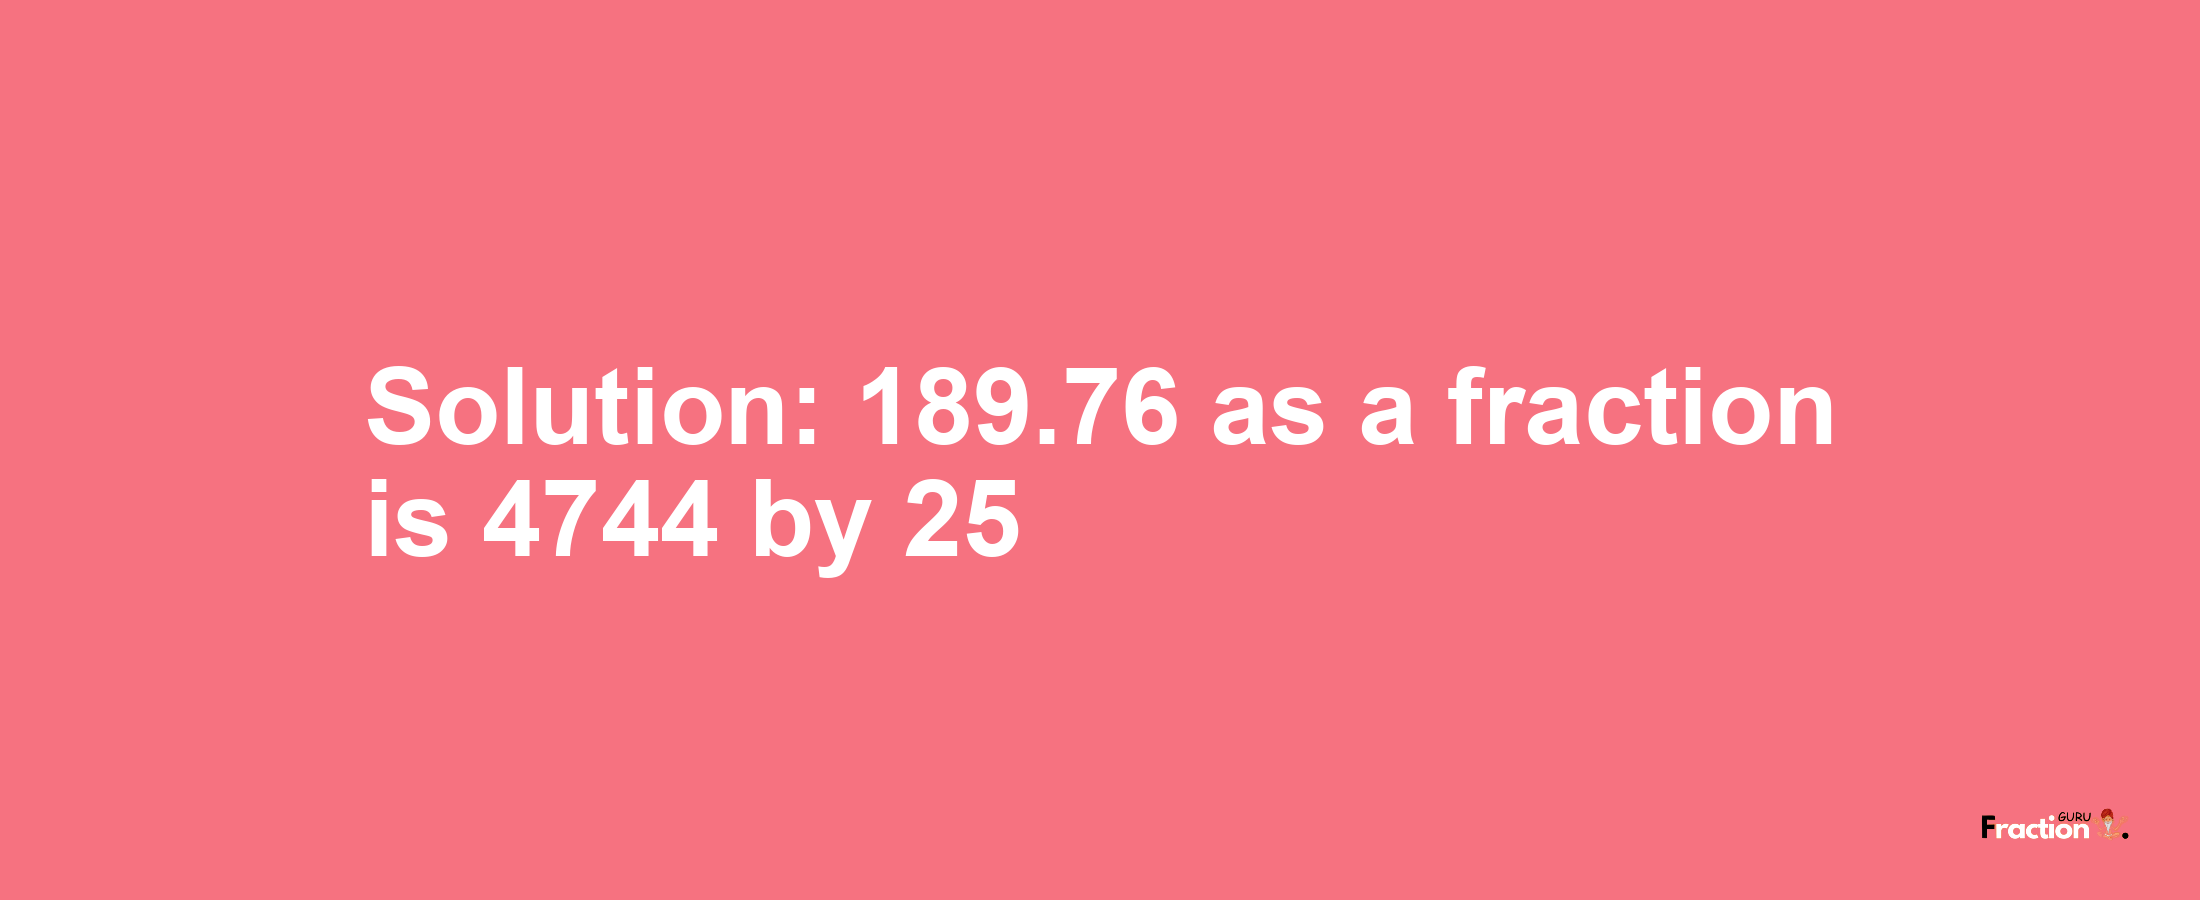 Solution:189.76 as a fraction is 4744/25